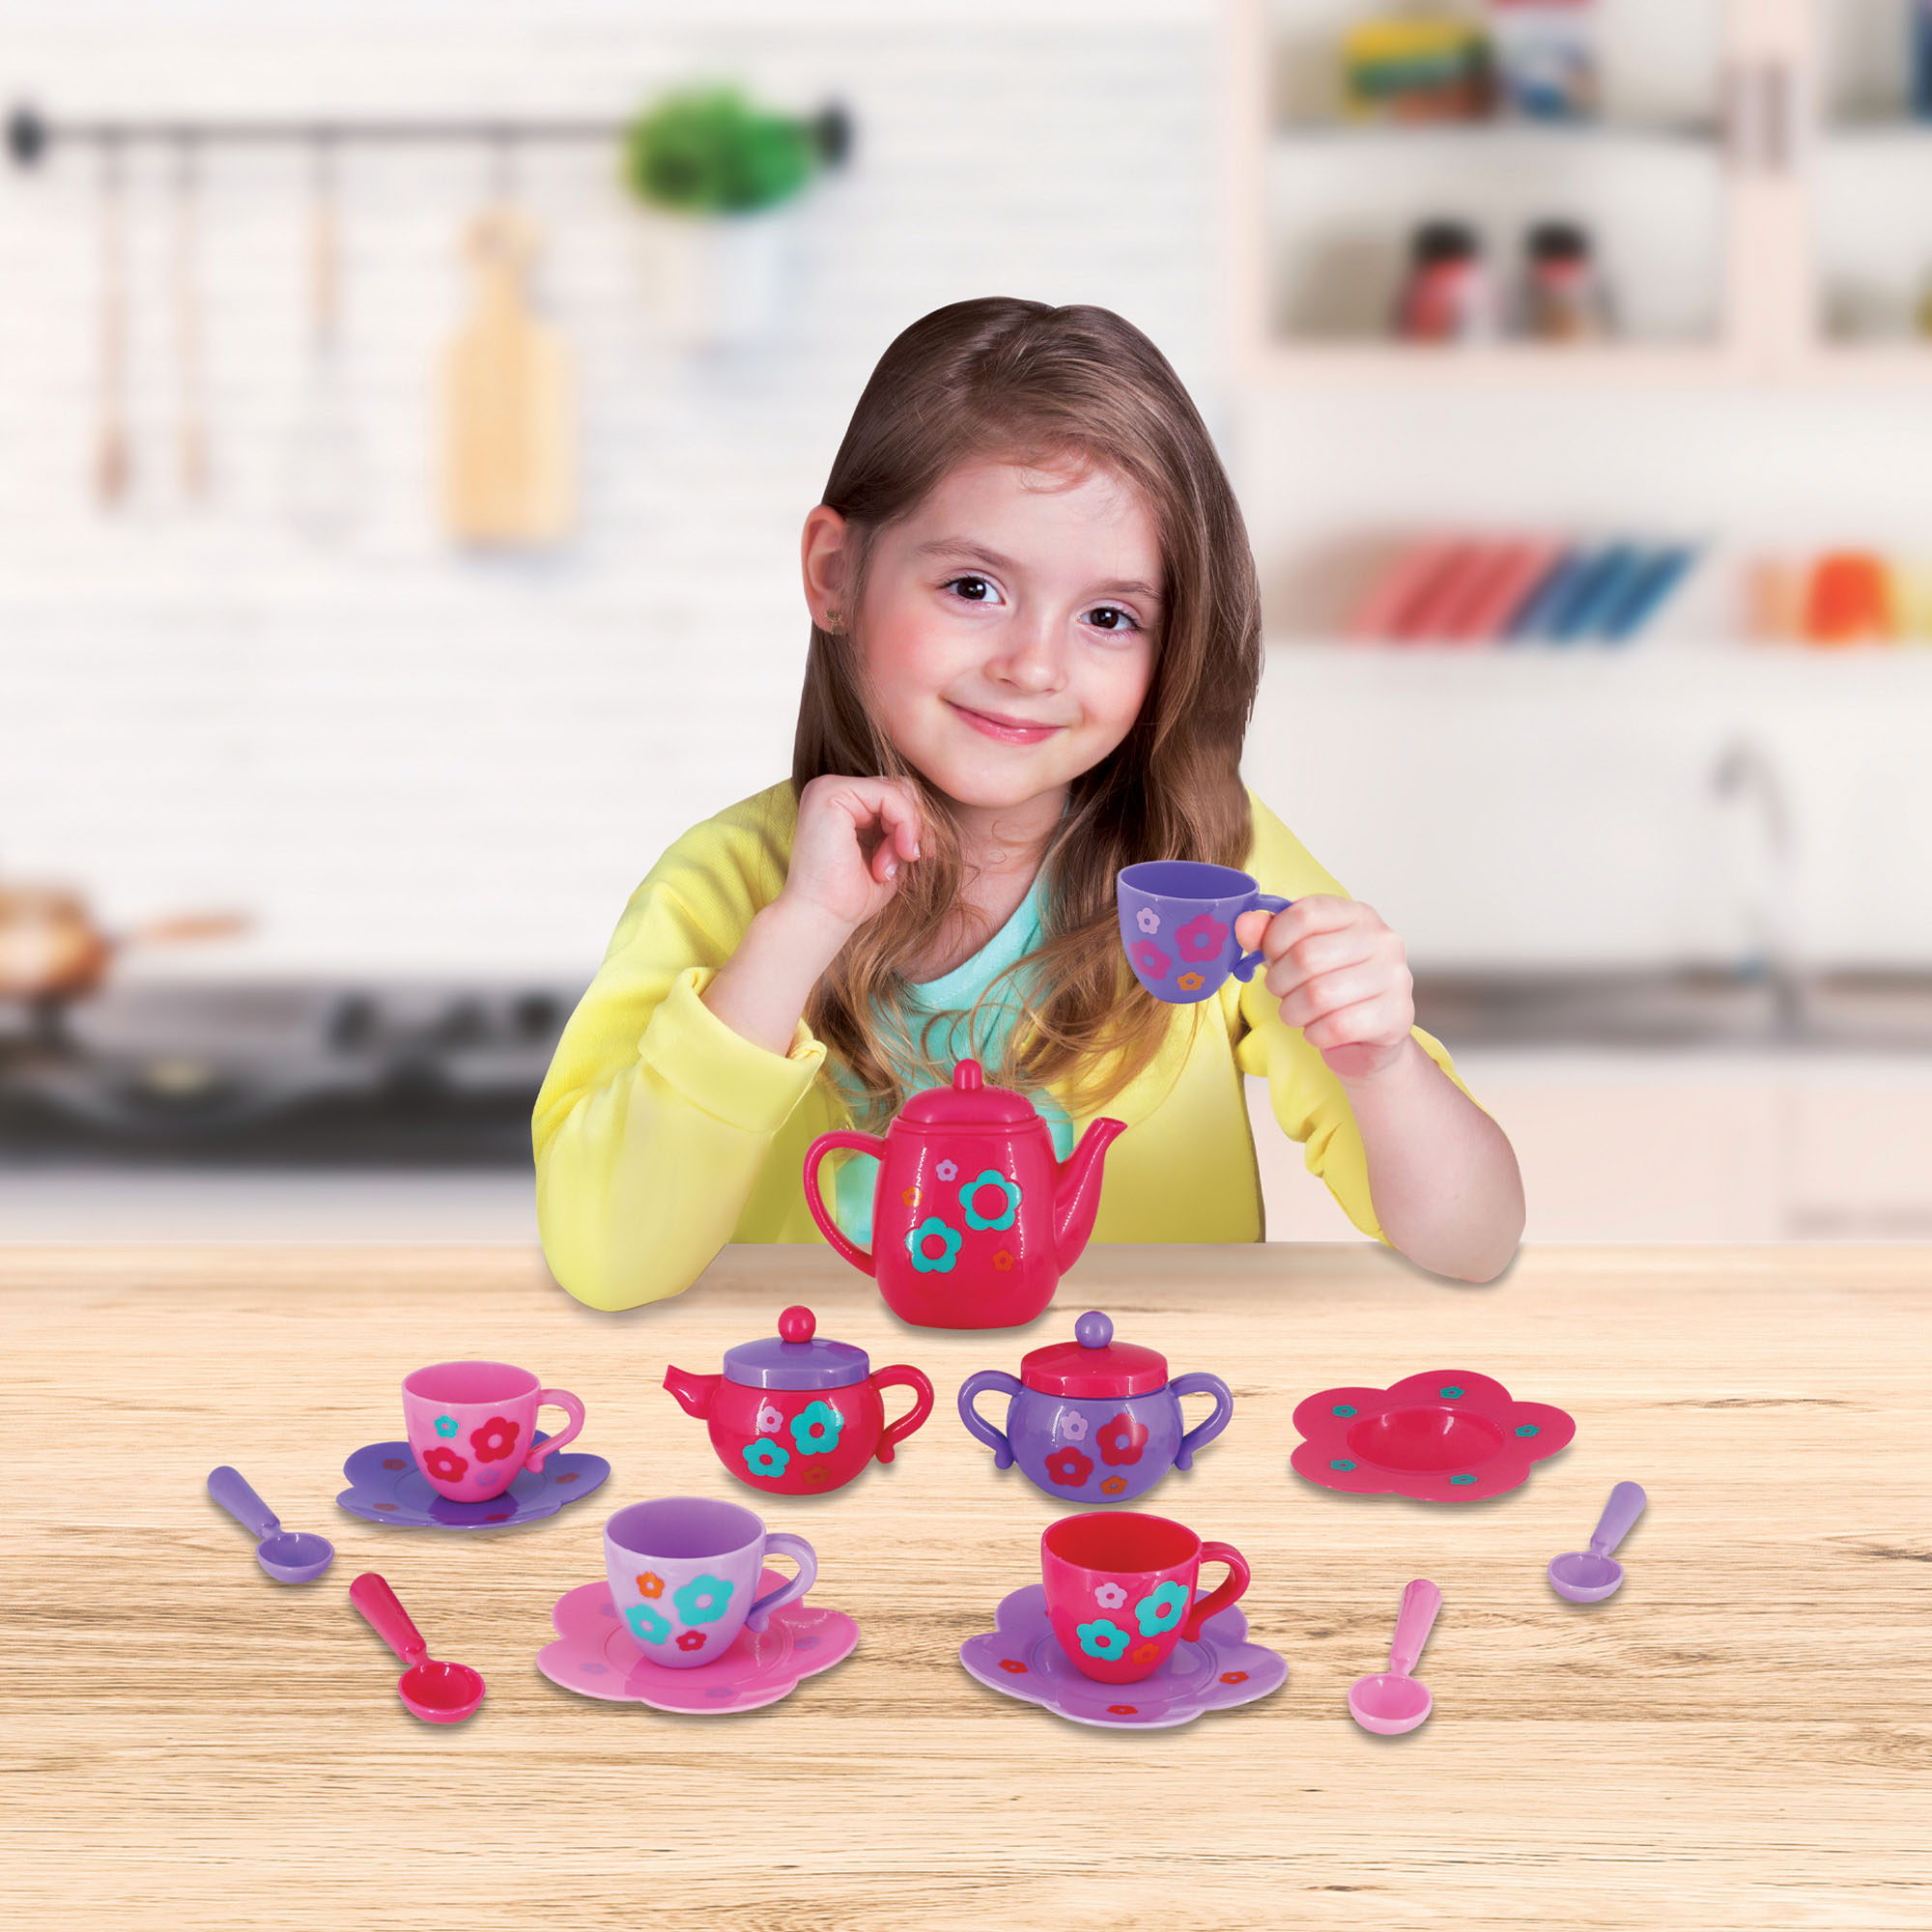 Kid Connection 18-Piece Tea Play Set - image 4 of 5